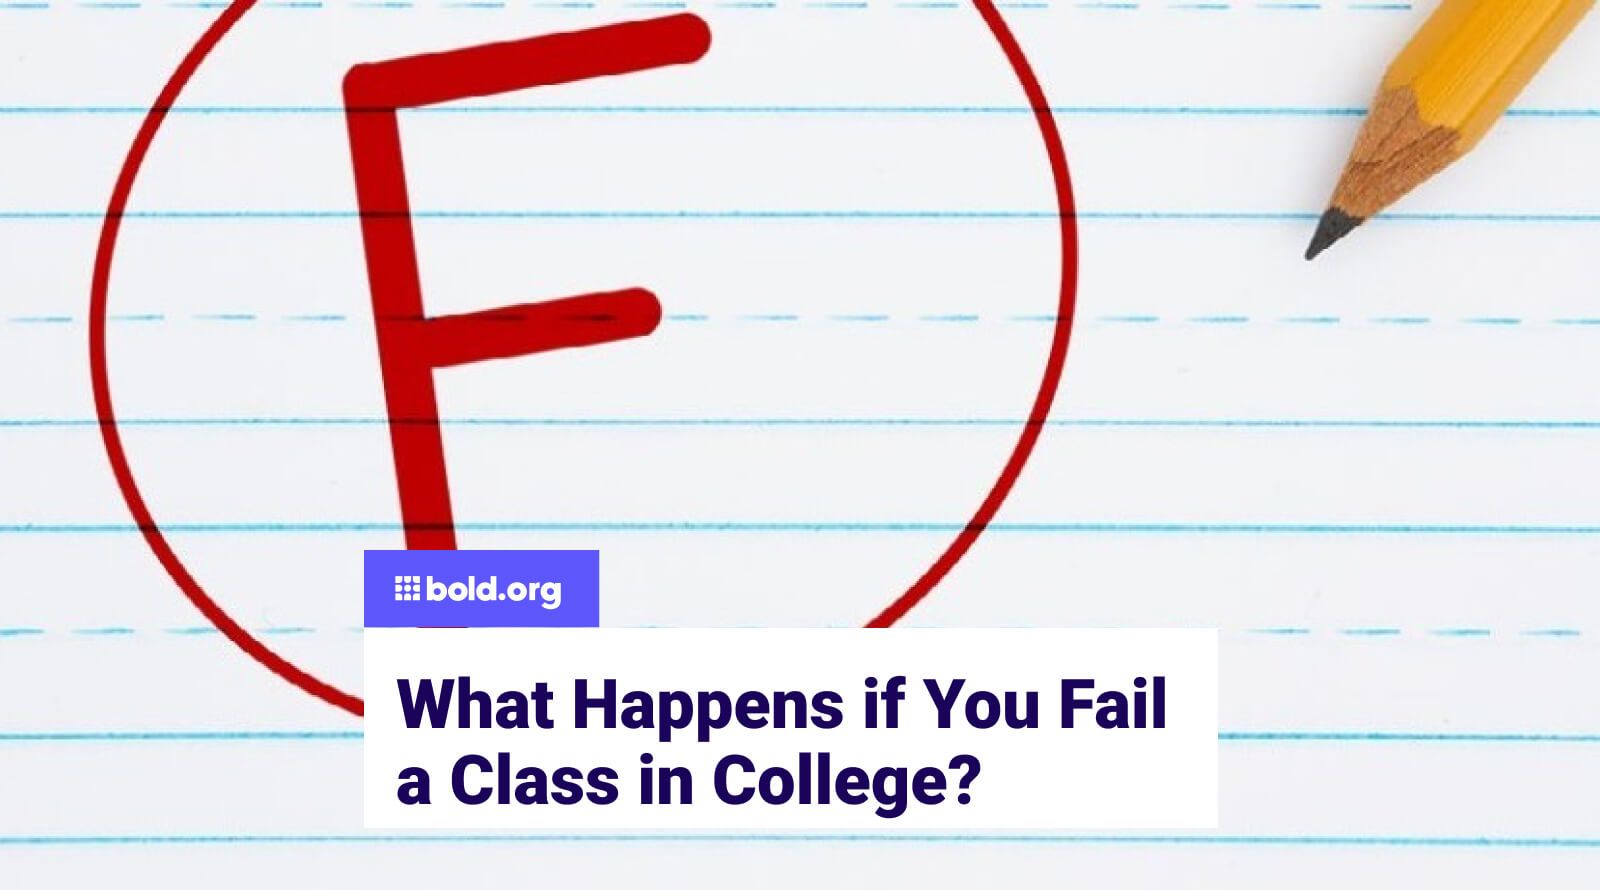 What Happens if You Fail a Class in College?